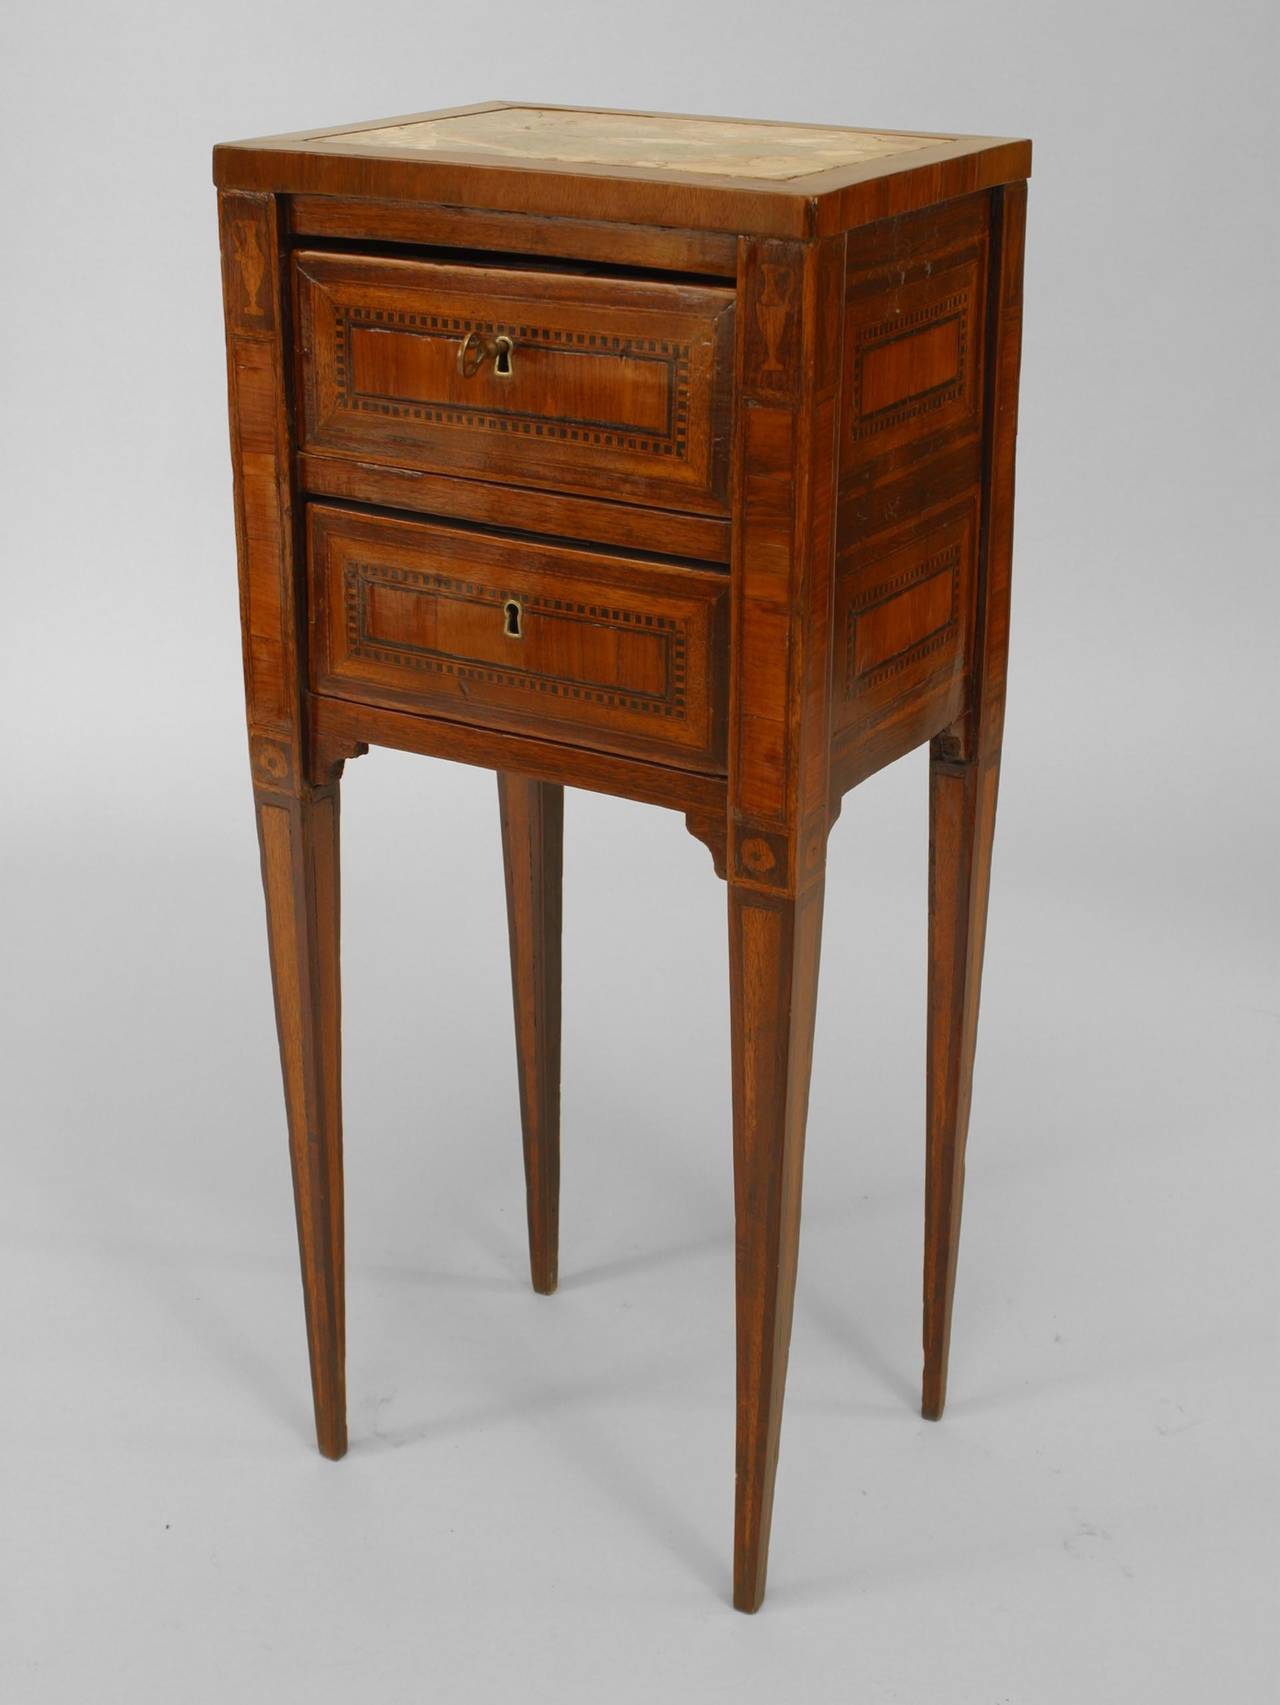 18th century Italian Neoclassical mahogany 2 drawer end table with inlaid
trim and an inset marble top above four tall tapered square legs.